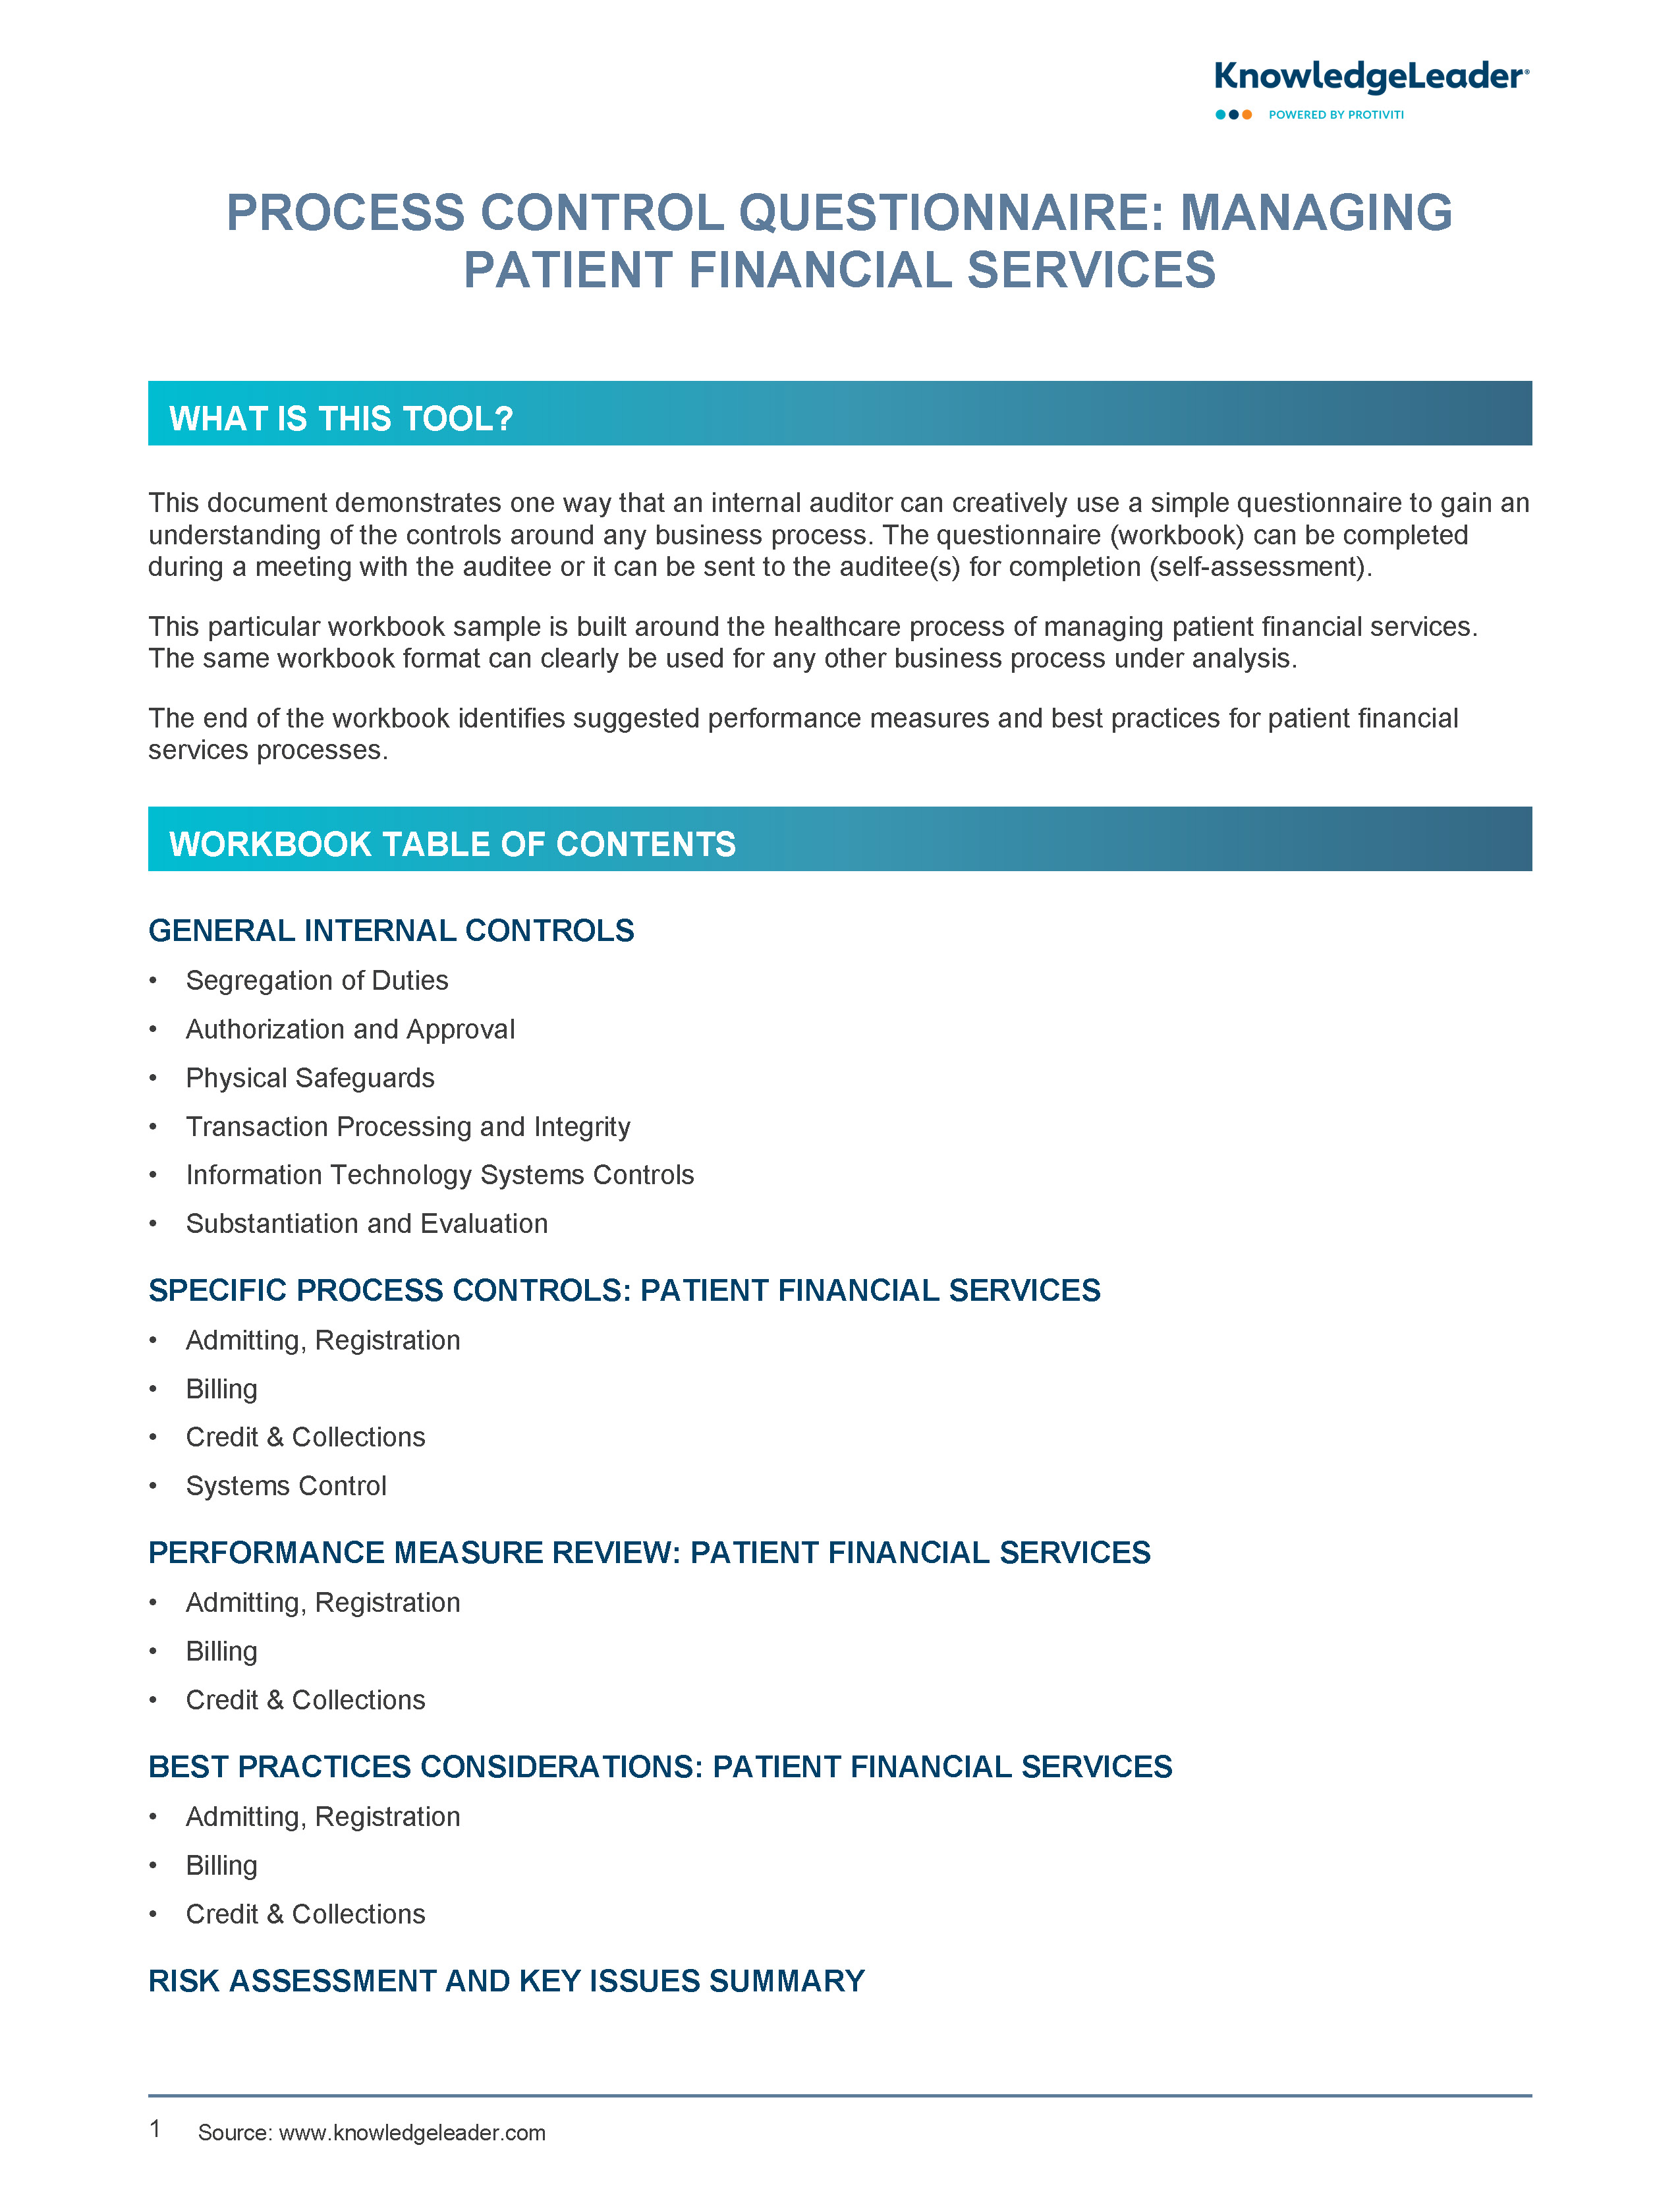 Screenshot of the first page of Process Control Questionnaire - Managing Patient Financial Services